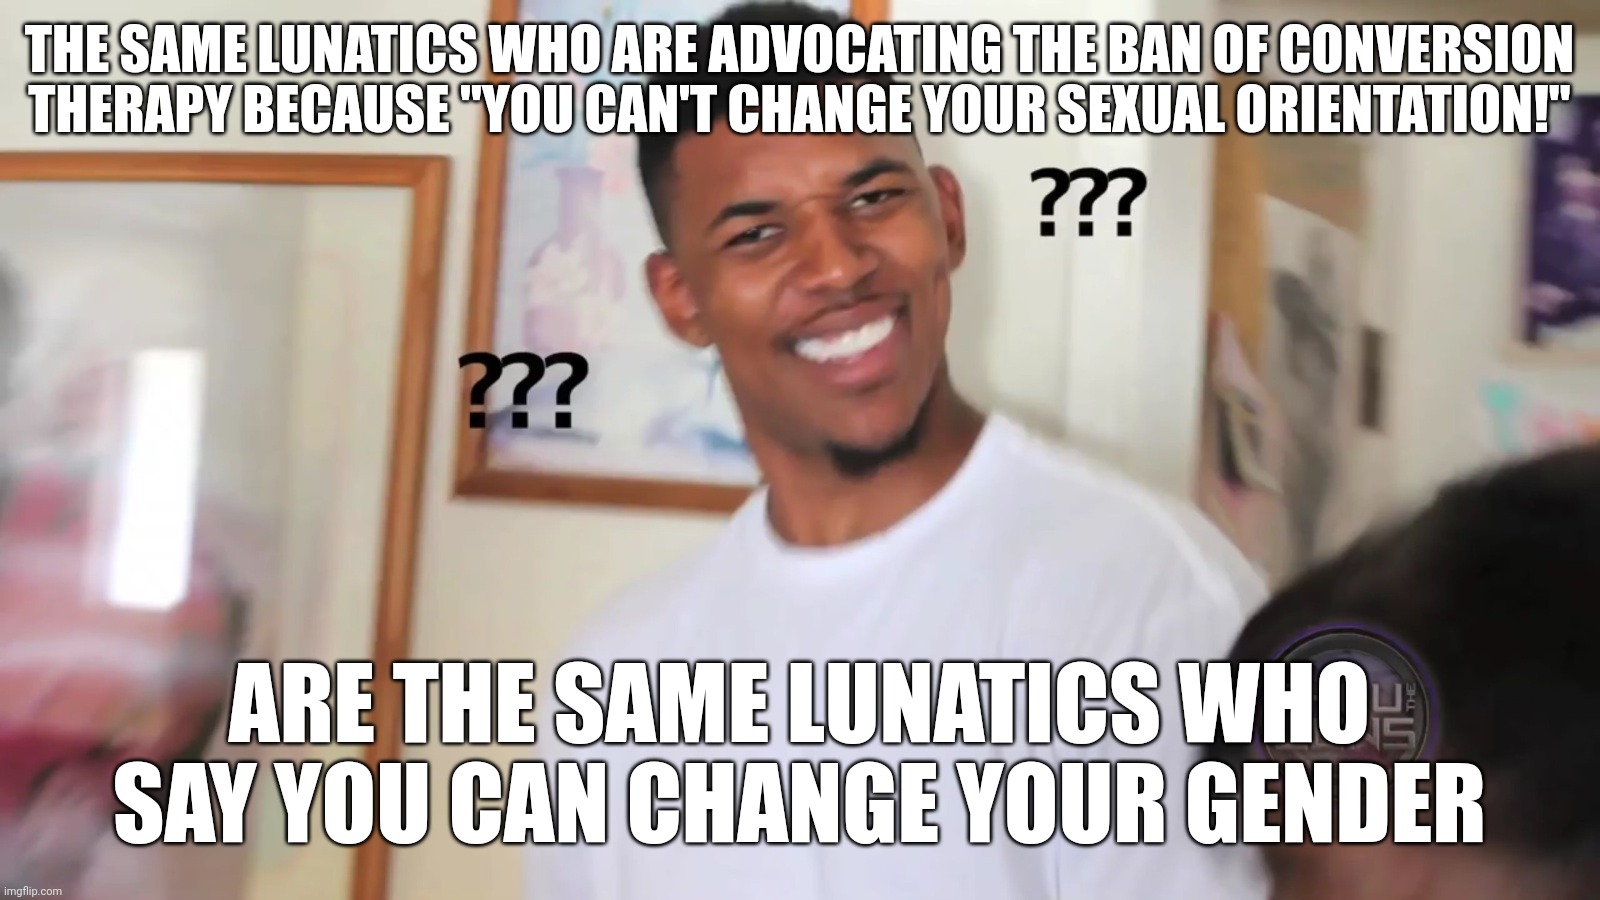 That's Right, They're the Very Same Lunatics | THE SAME LUNATICS WHO ARE ADVOCATING THE BAN OF CONVERSION THERAPY BECAUSE "YOU CAN'T CHANGE YOUR SEXUAL ORIENTATION!"; ARE THE SAME LUNATICS WHO SAY YOU CAN CHANGE YOUR GENDER | image tagged in black guy question mark,black guy confused,lgbt,lgbtq,gender,lunatic | made w/ Imgflip meme maker